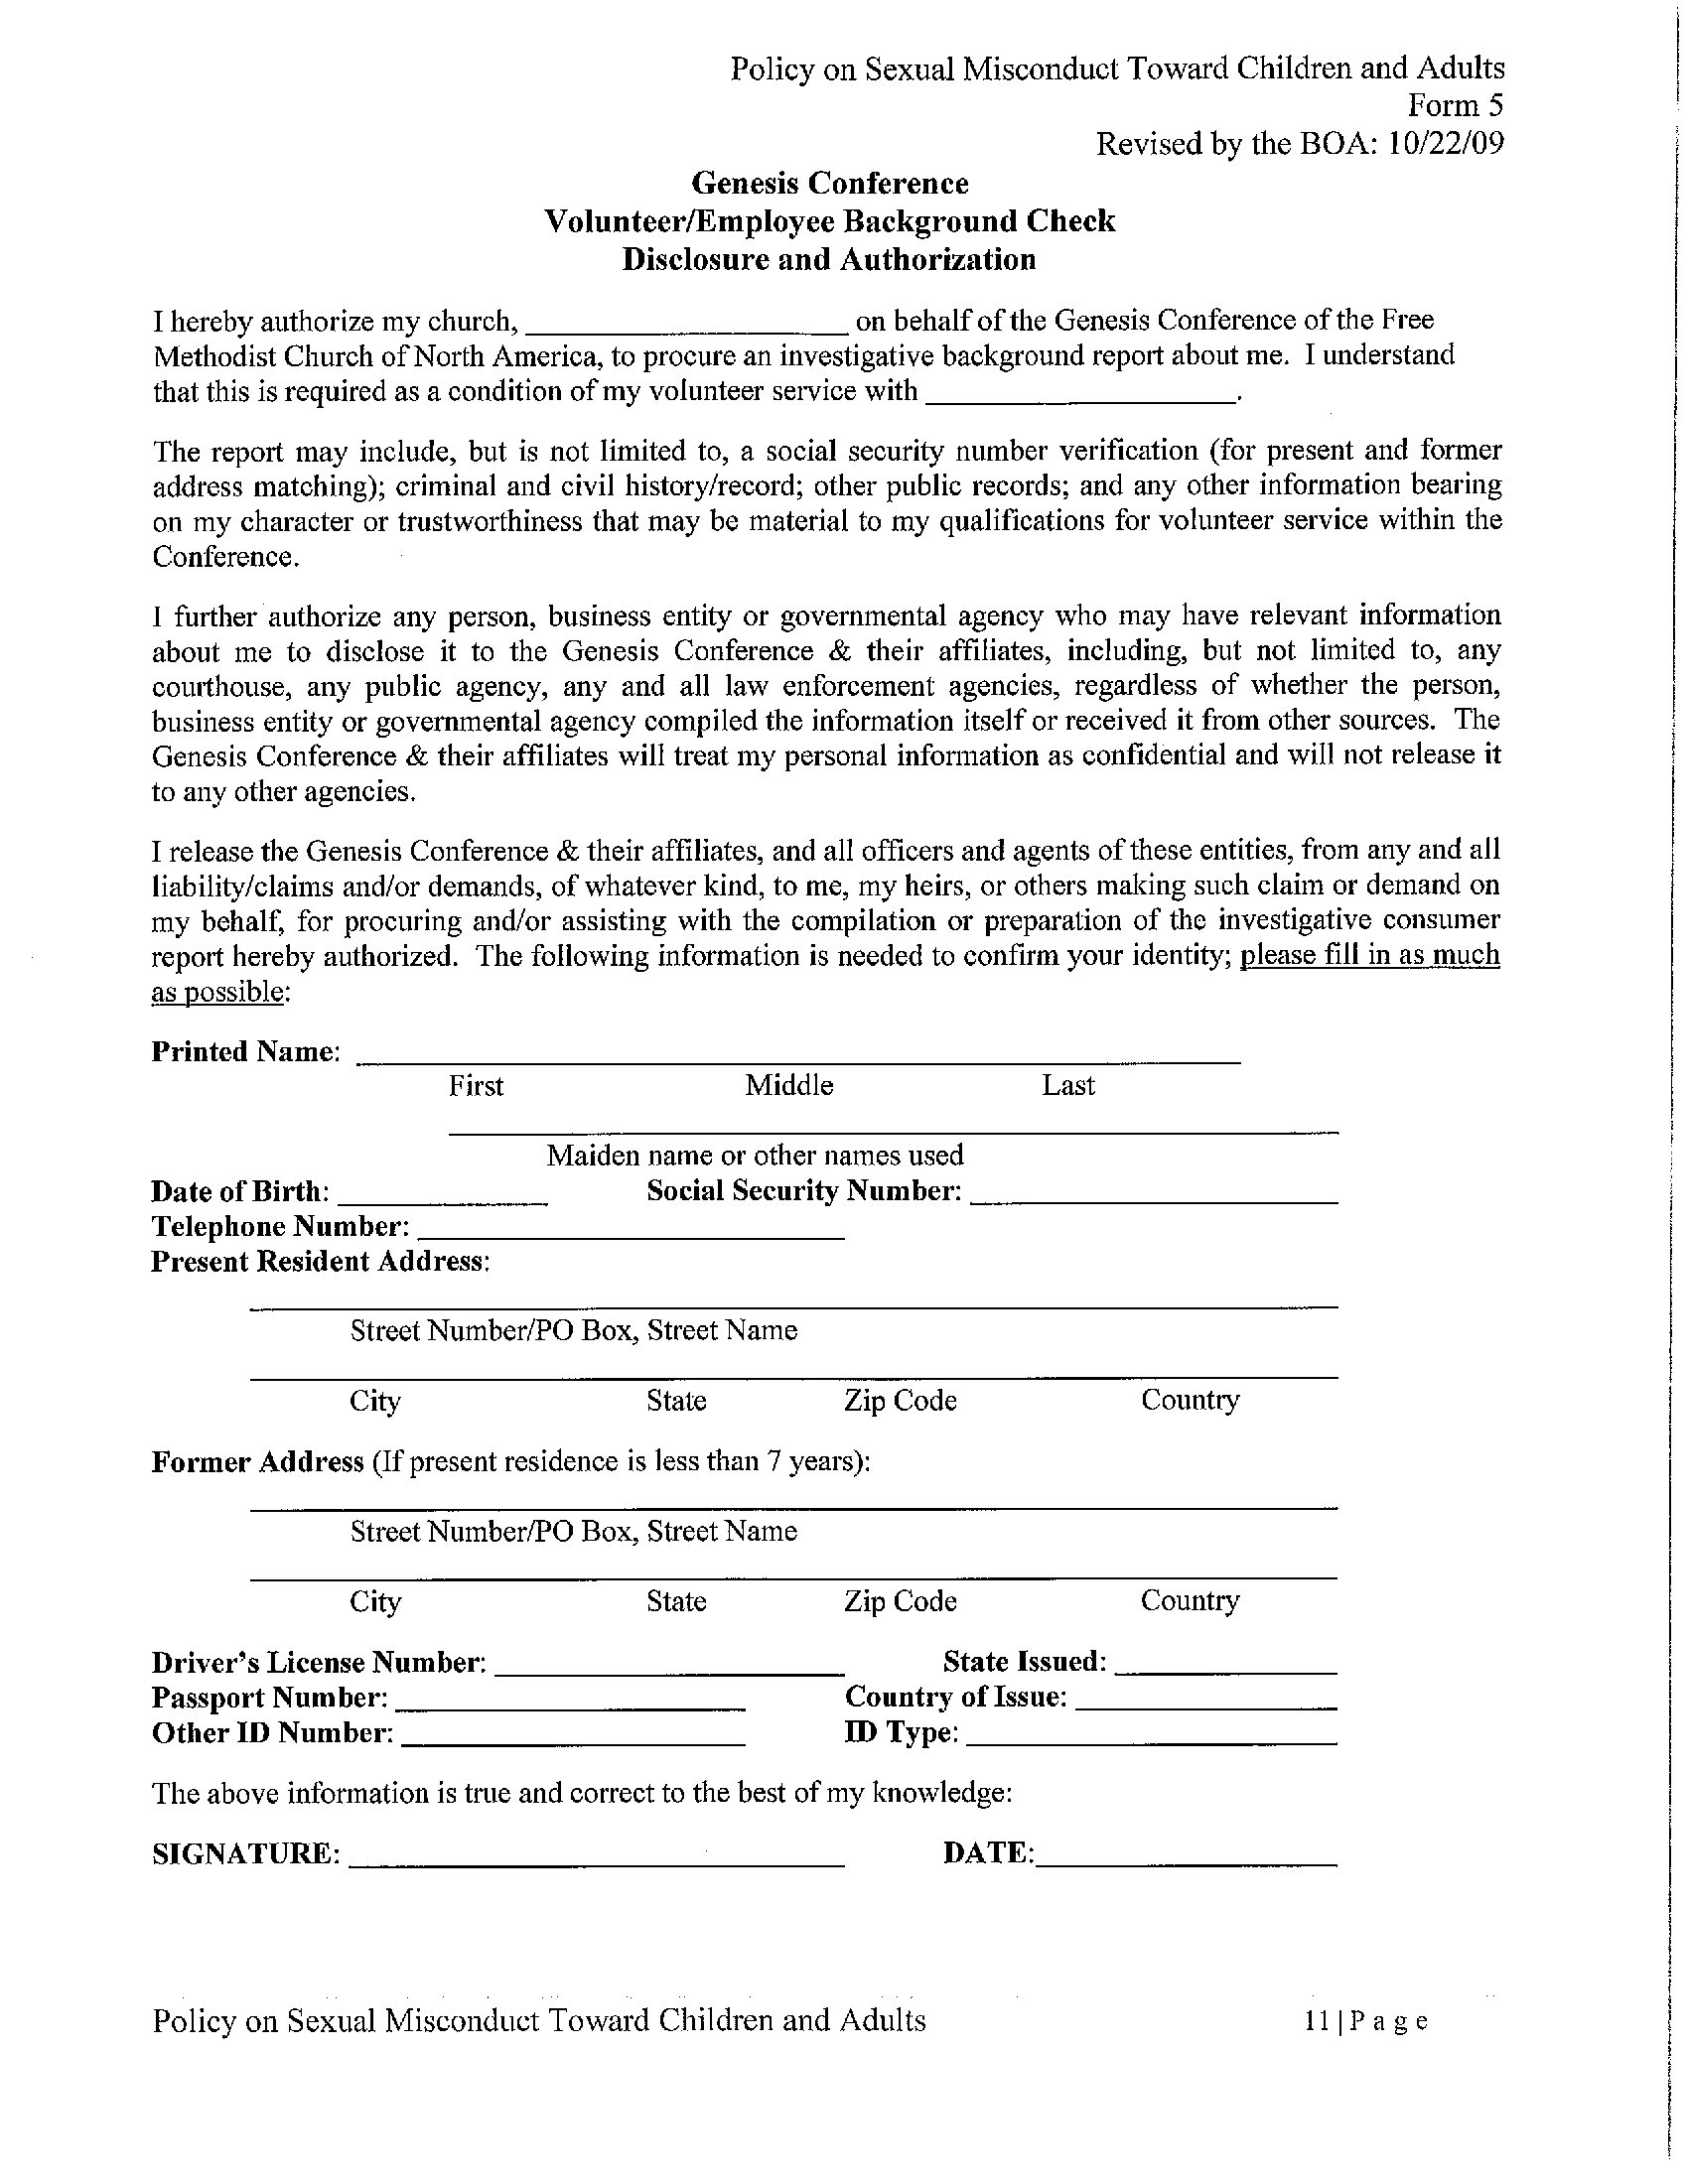 Genesis Conference Background Check Form — New Hope Free Methodist Church